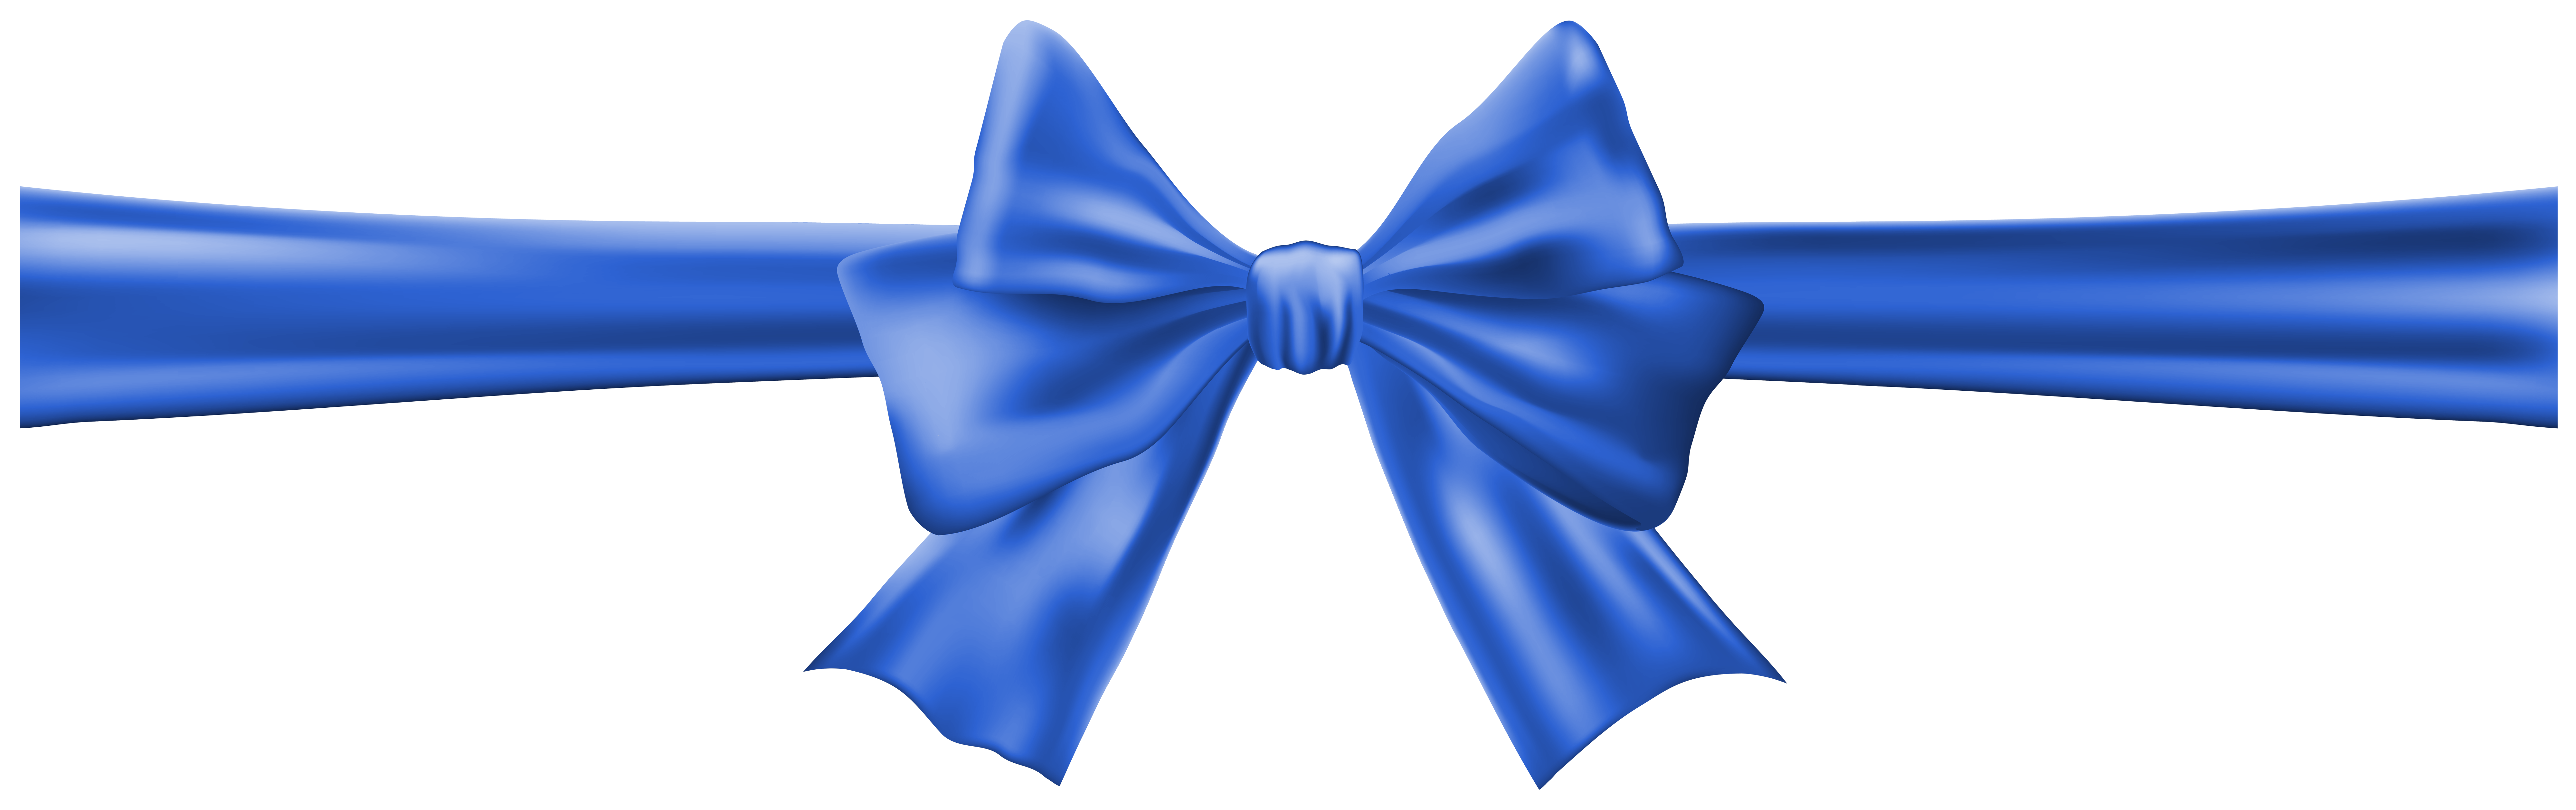 Bow with Ribbon Blue Clip Art Image​